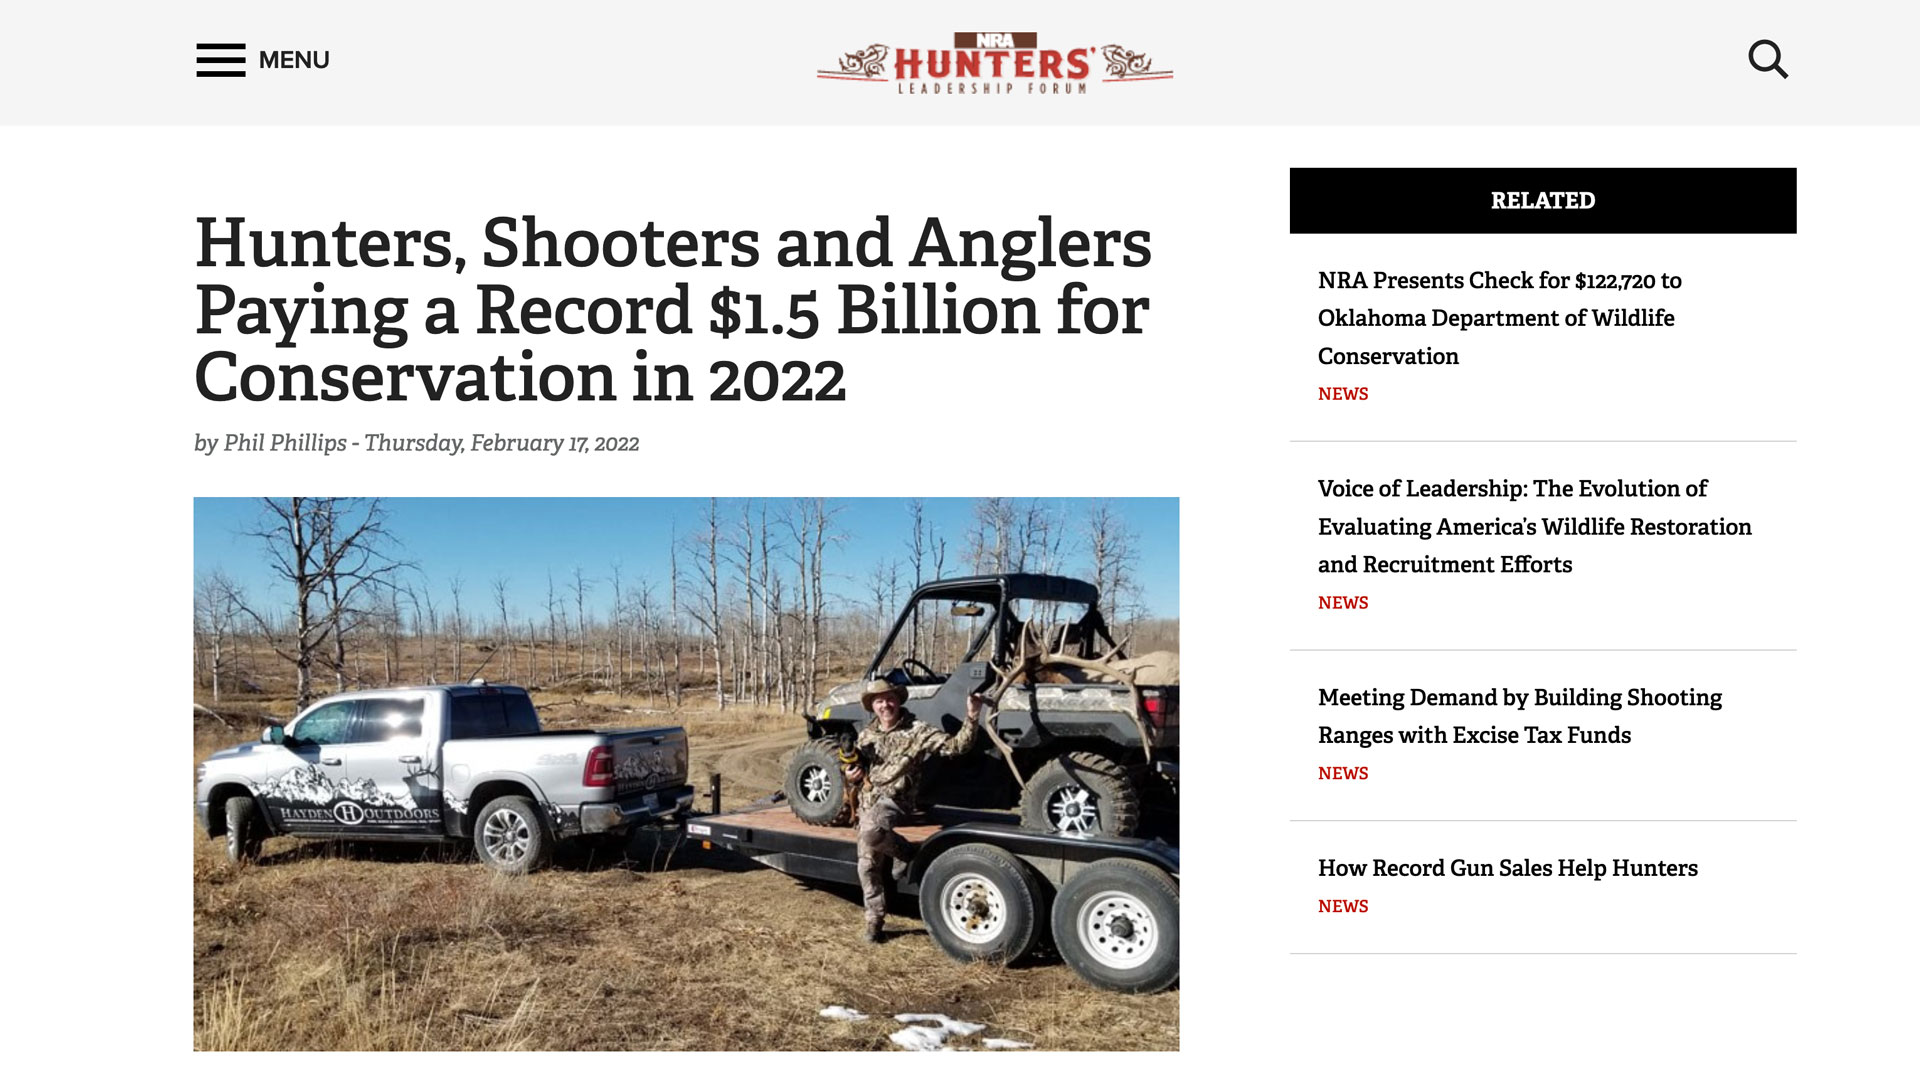 nra hlf story explaining hunters, fishers and shooters have raised $1.5 billion for conservation in 2022